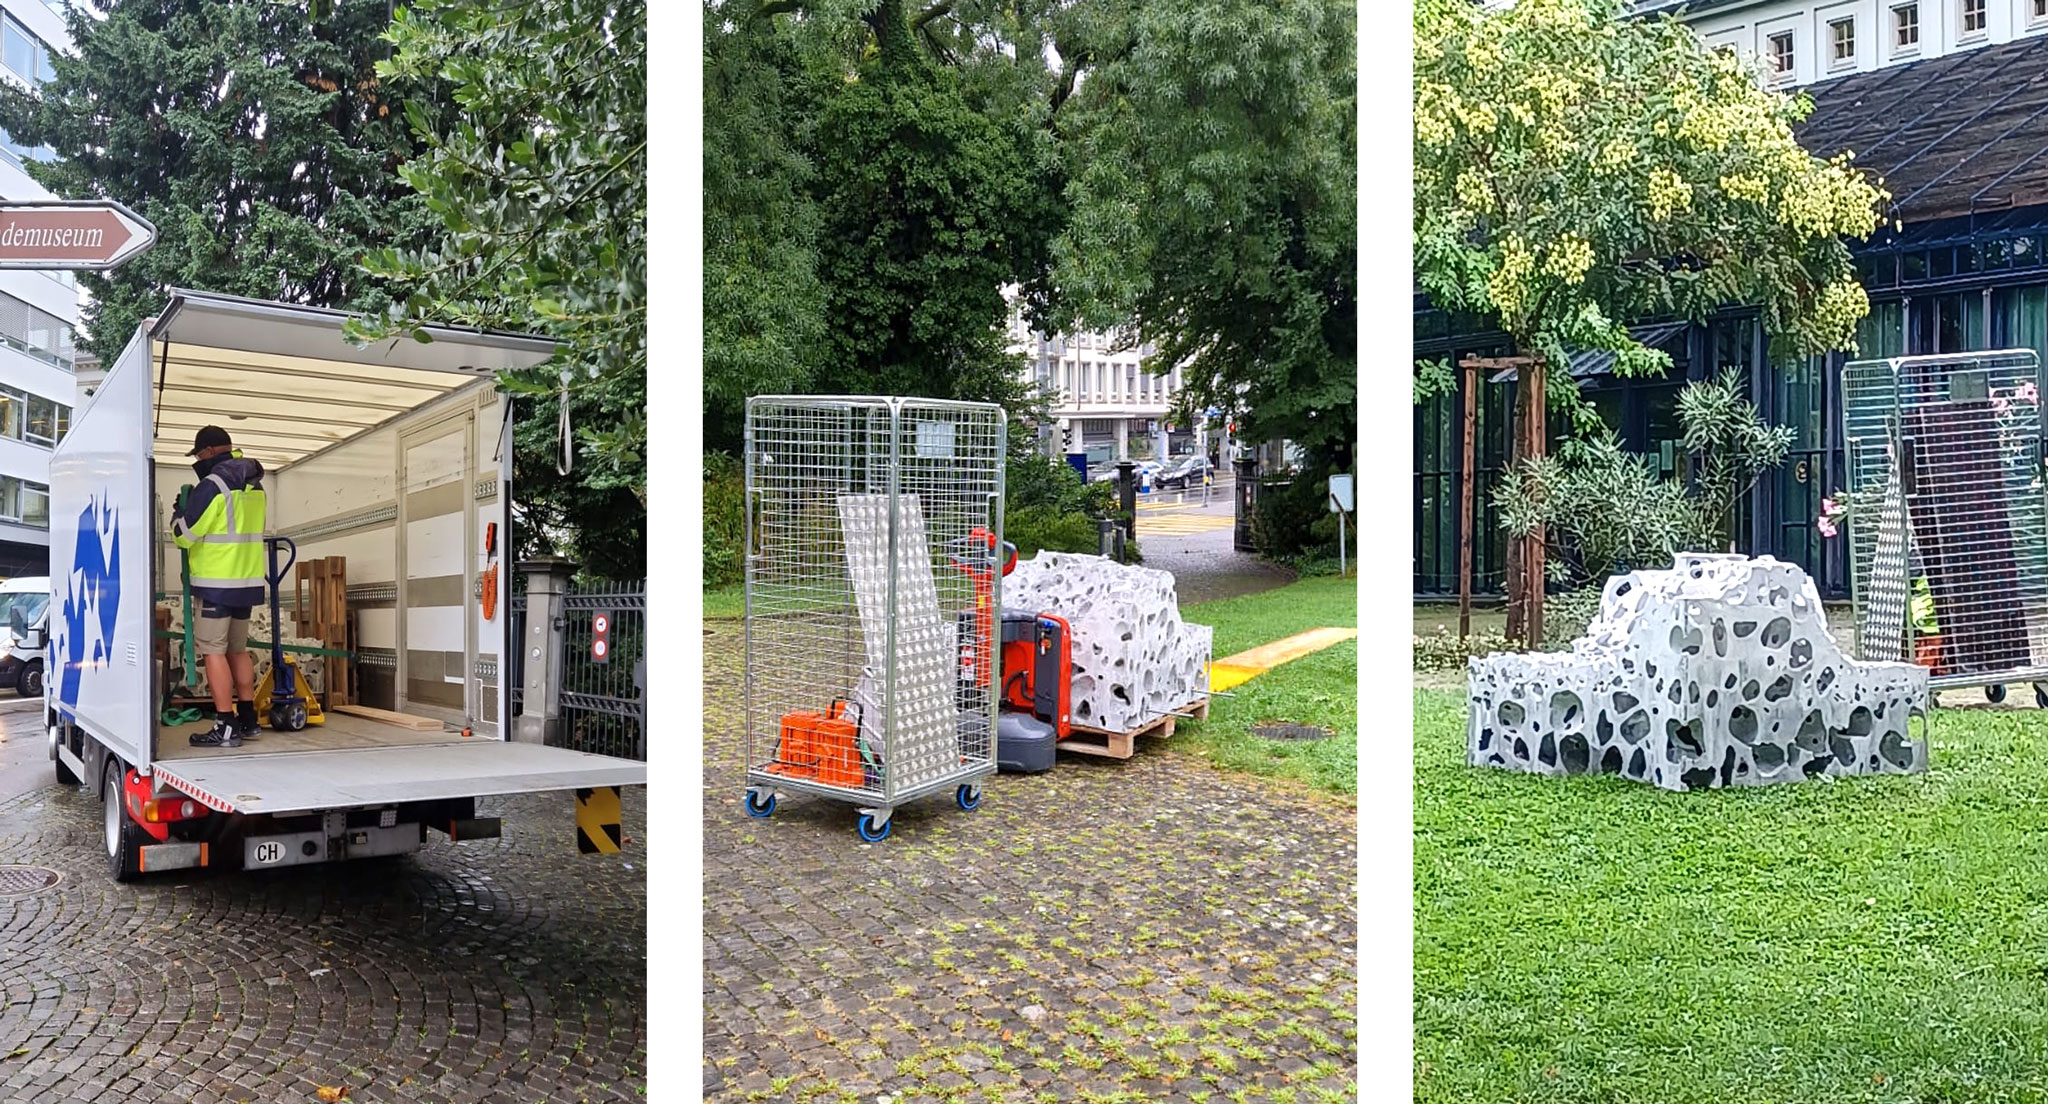 Arrival and set-up of a concrete sculpture in the Old Botanical Garden Zurich.